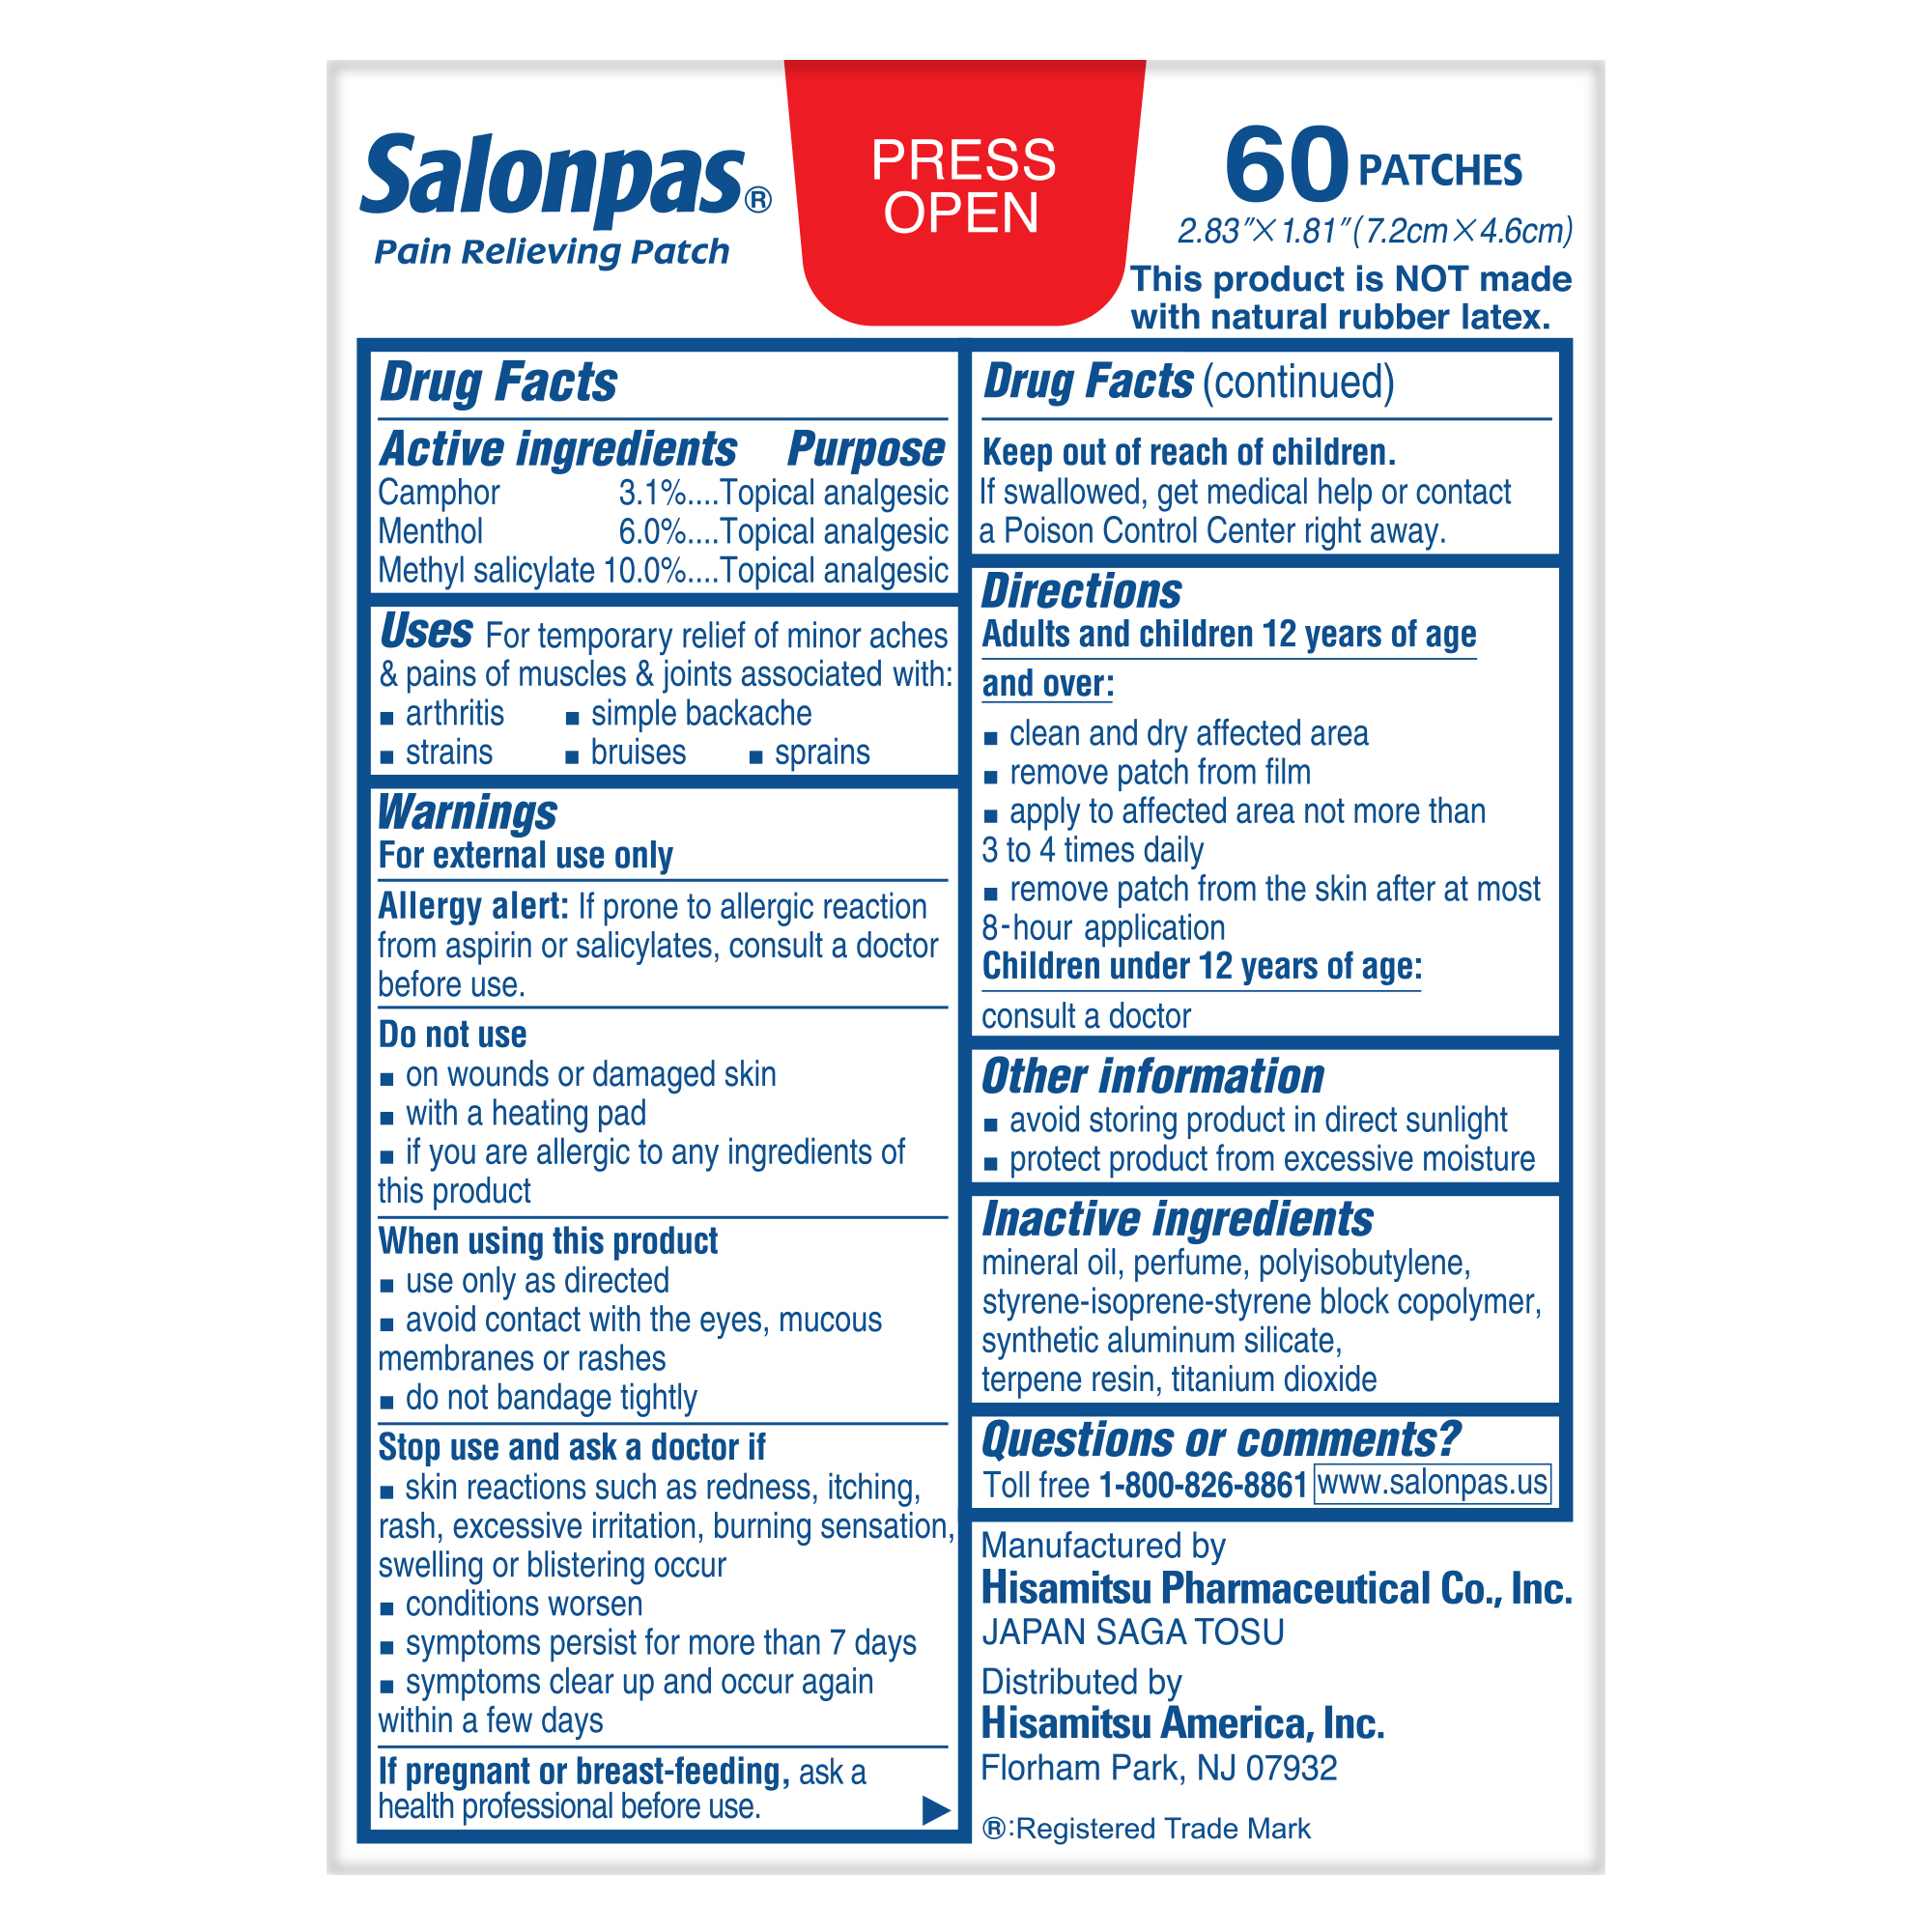 Salonpas Pain Relieving Patch, 60 count - image 3 of 9